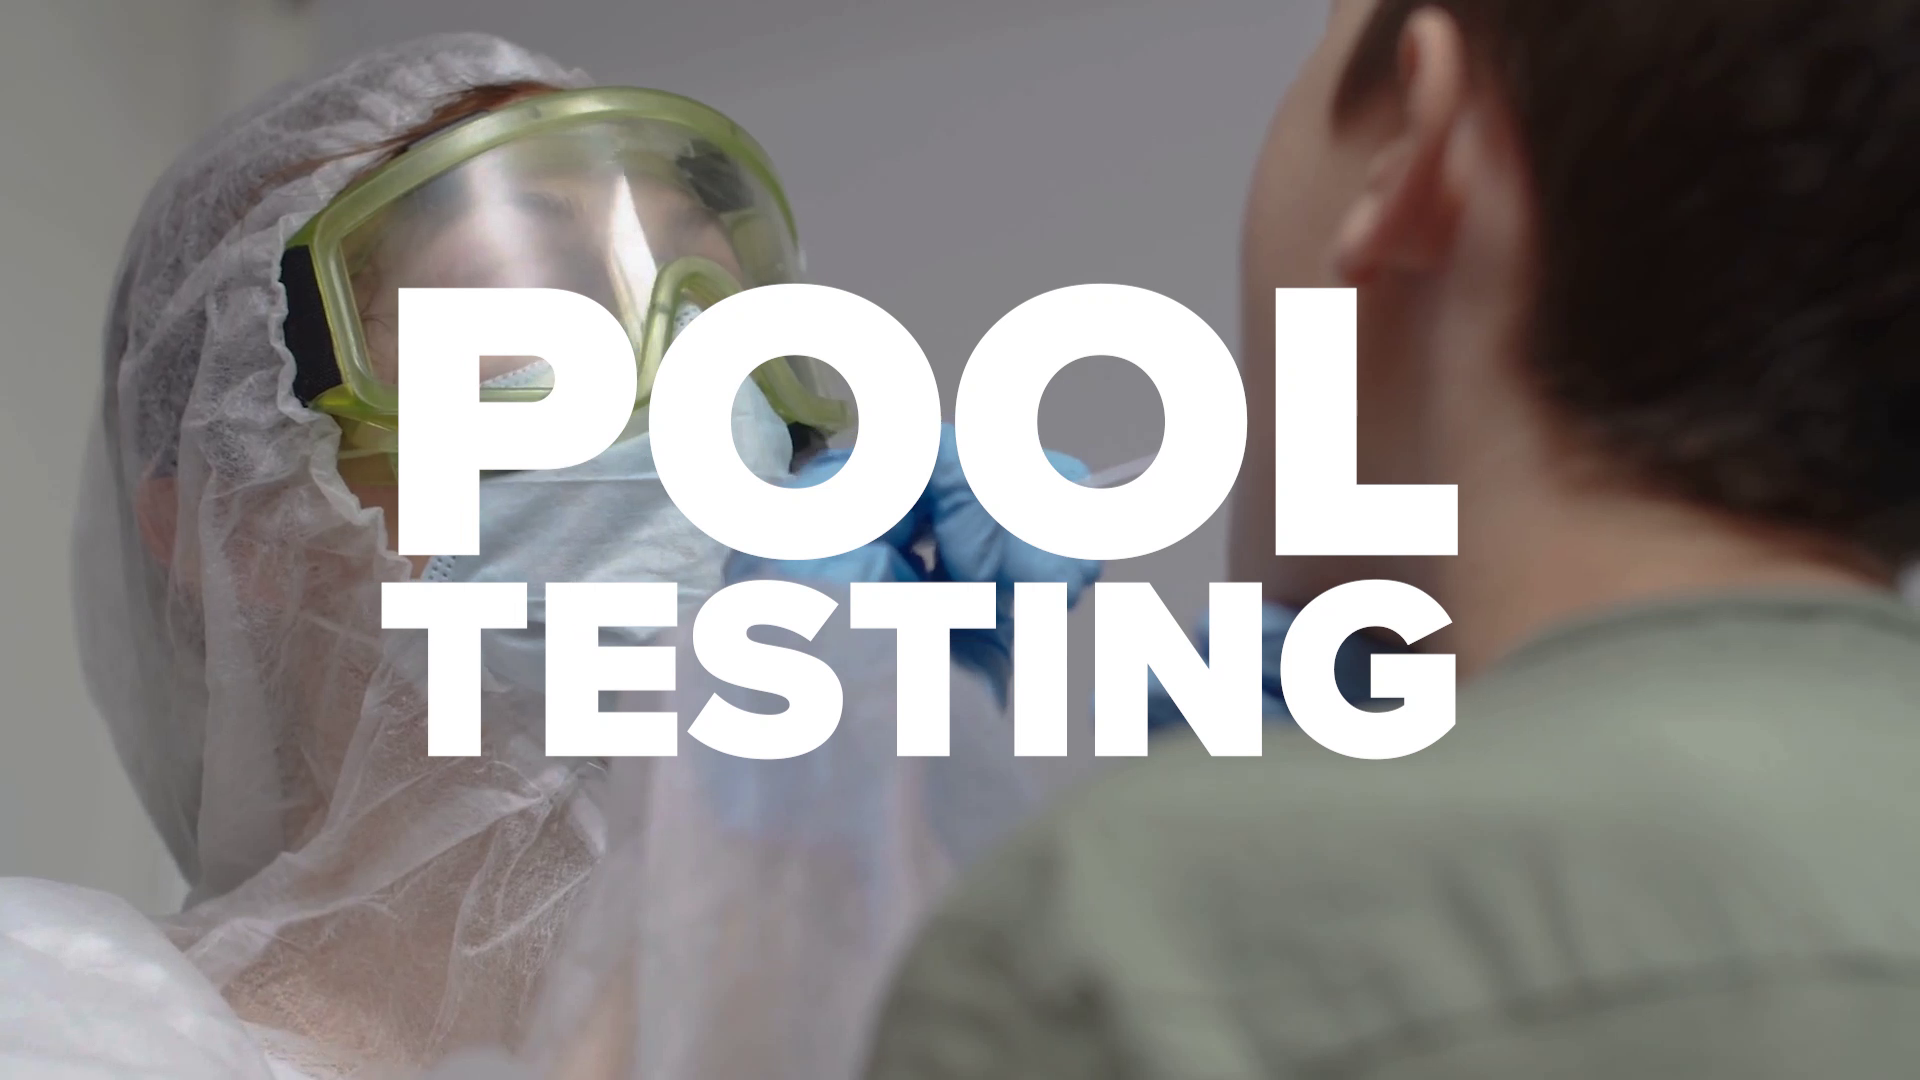 Dr. Anthony Fauci has suggested pool testing to increase the coronavirus testing capacity. Here's what it means.